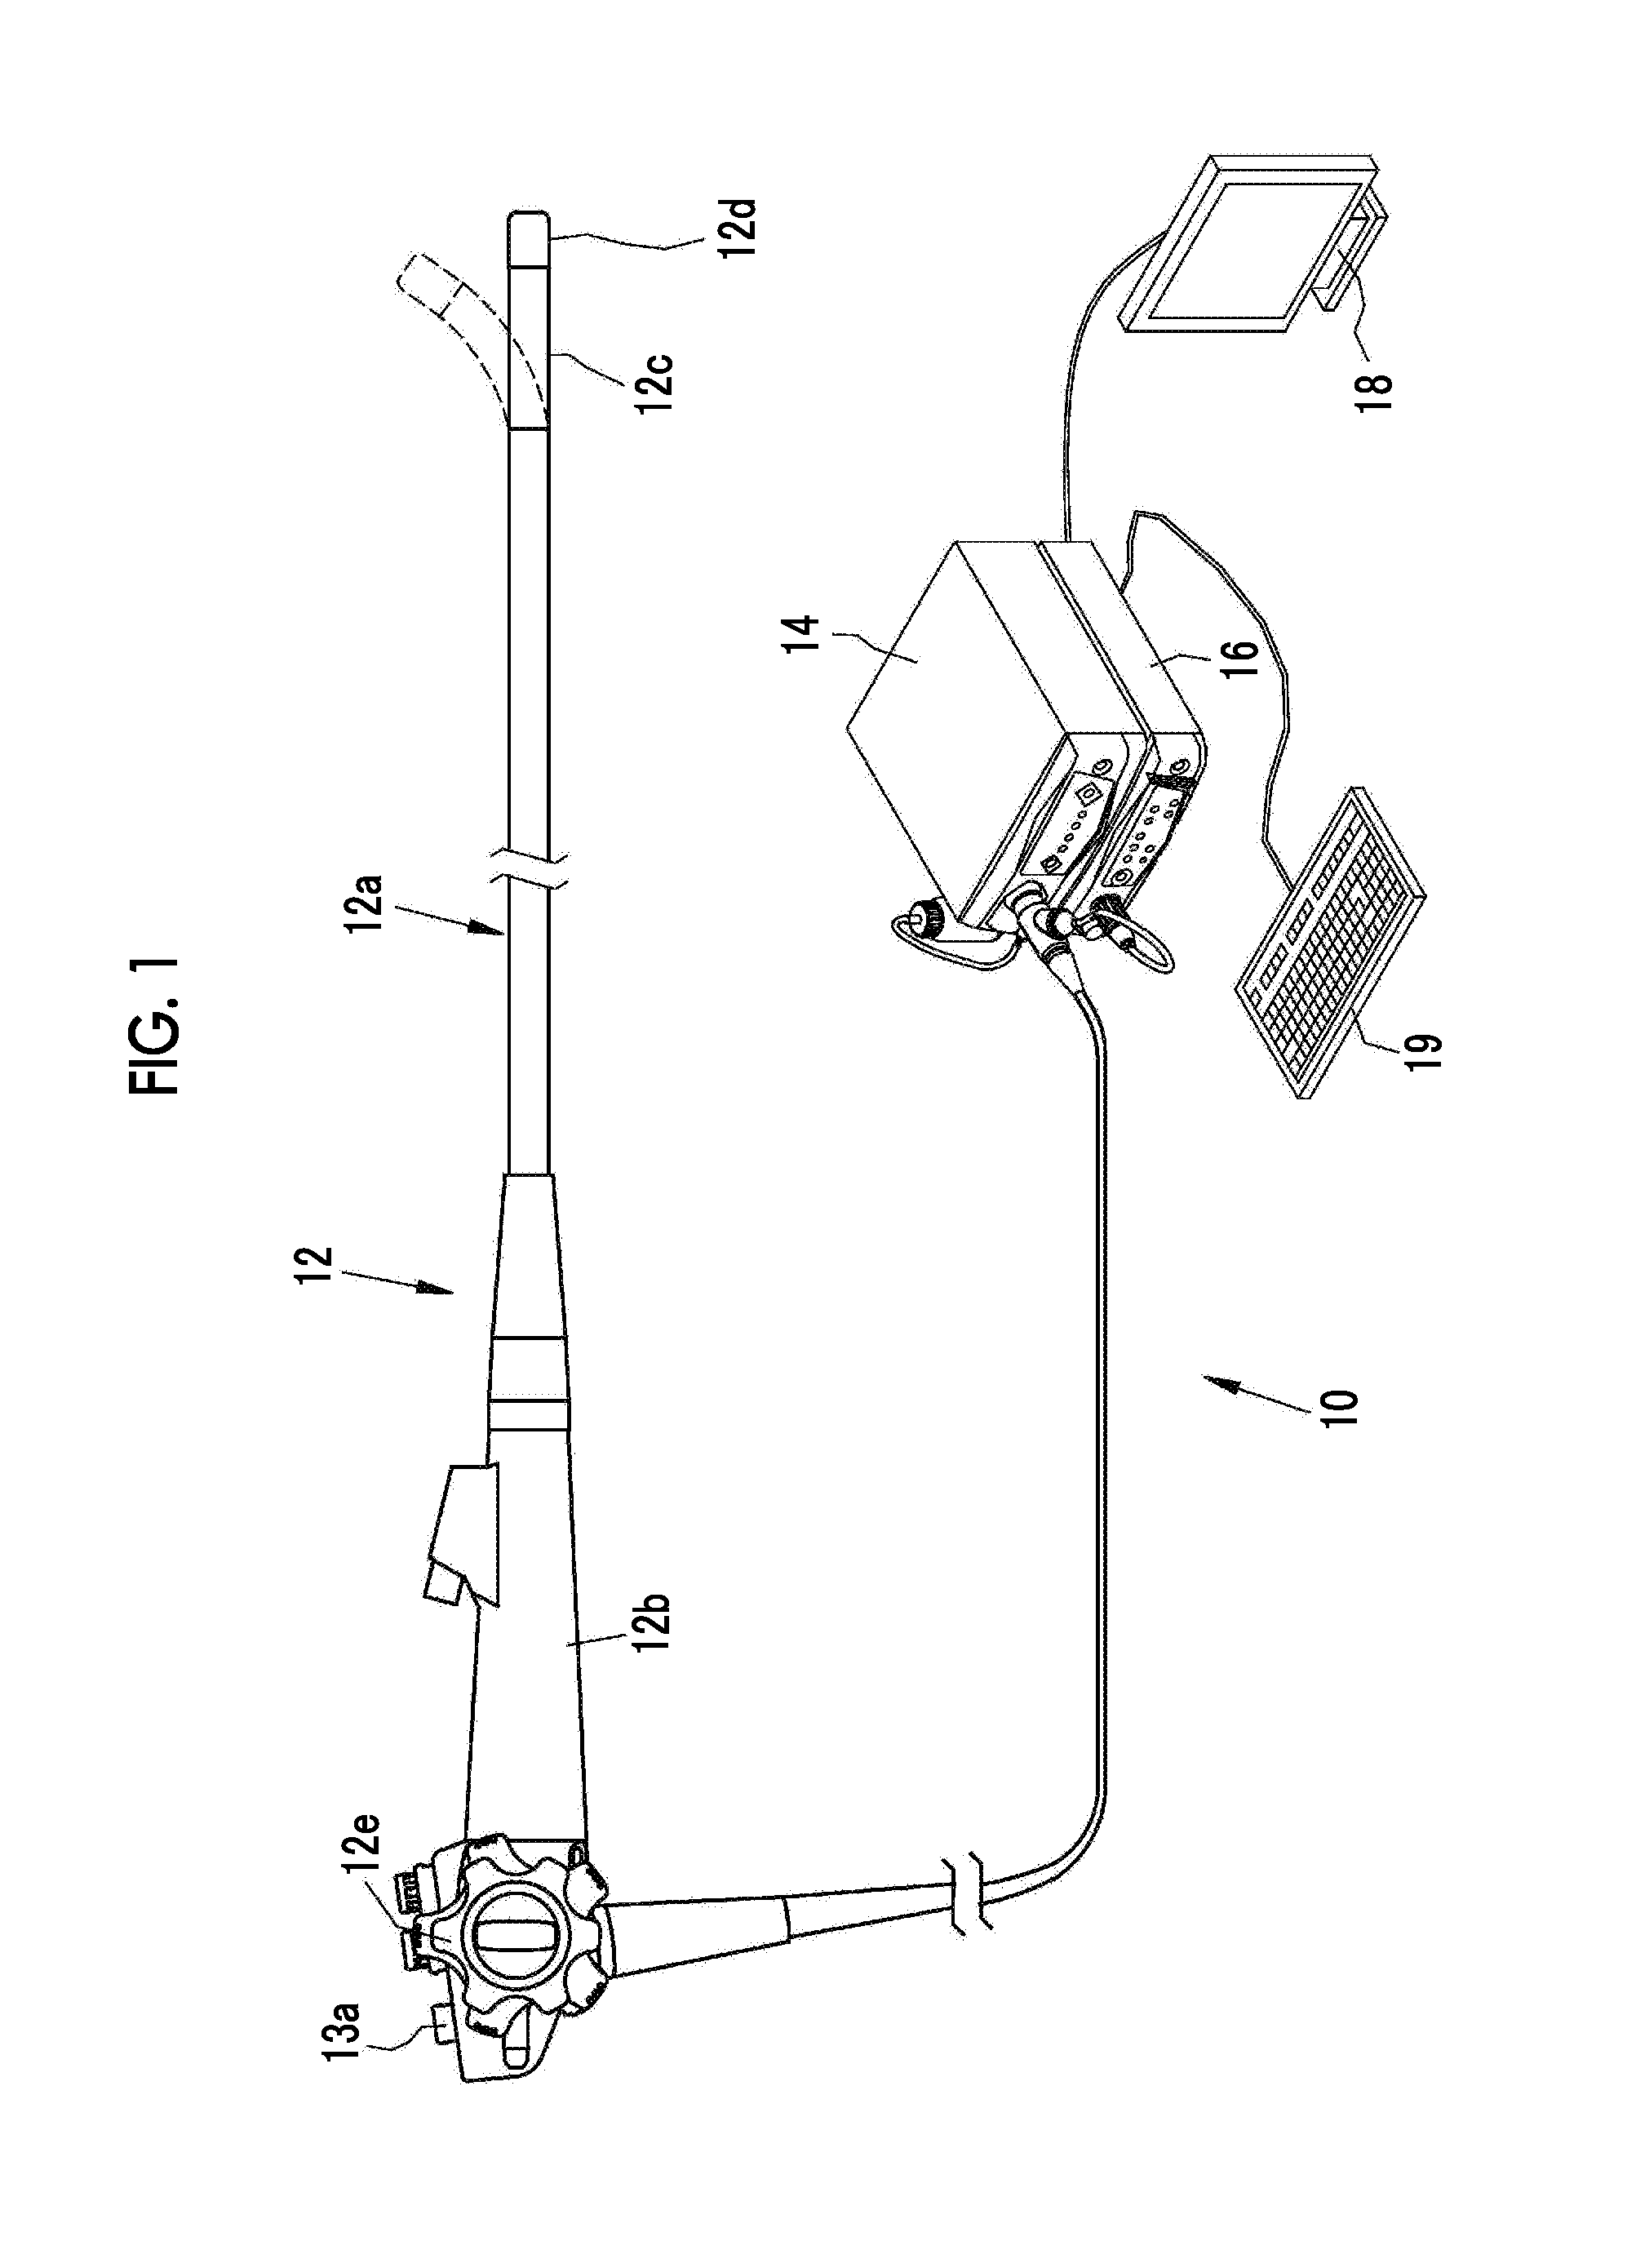 Medical image processing device, operation method therefor, and endoscope system